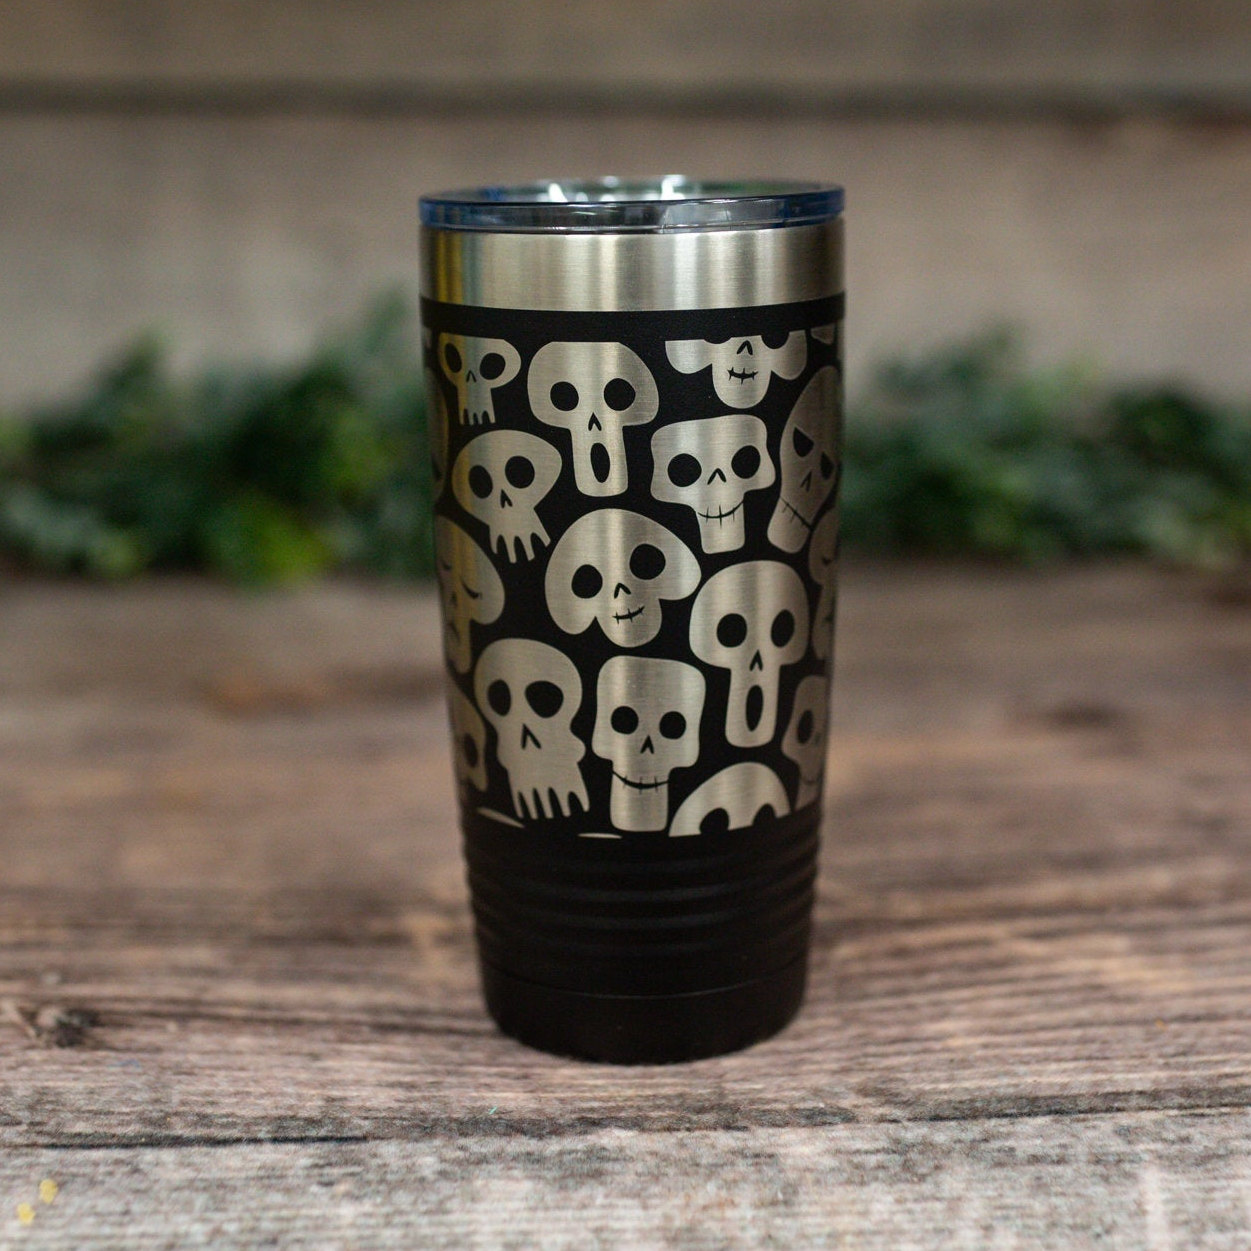 Day of the Dead or Dia de Muertos Glass Cup 16oz with straw and lid